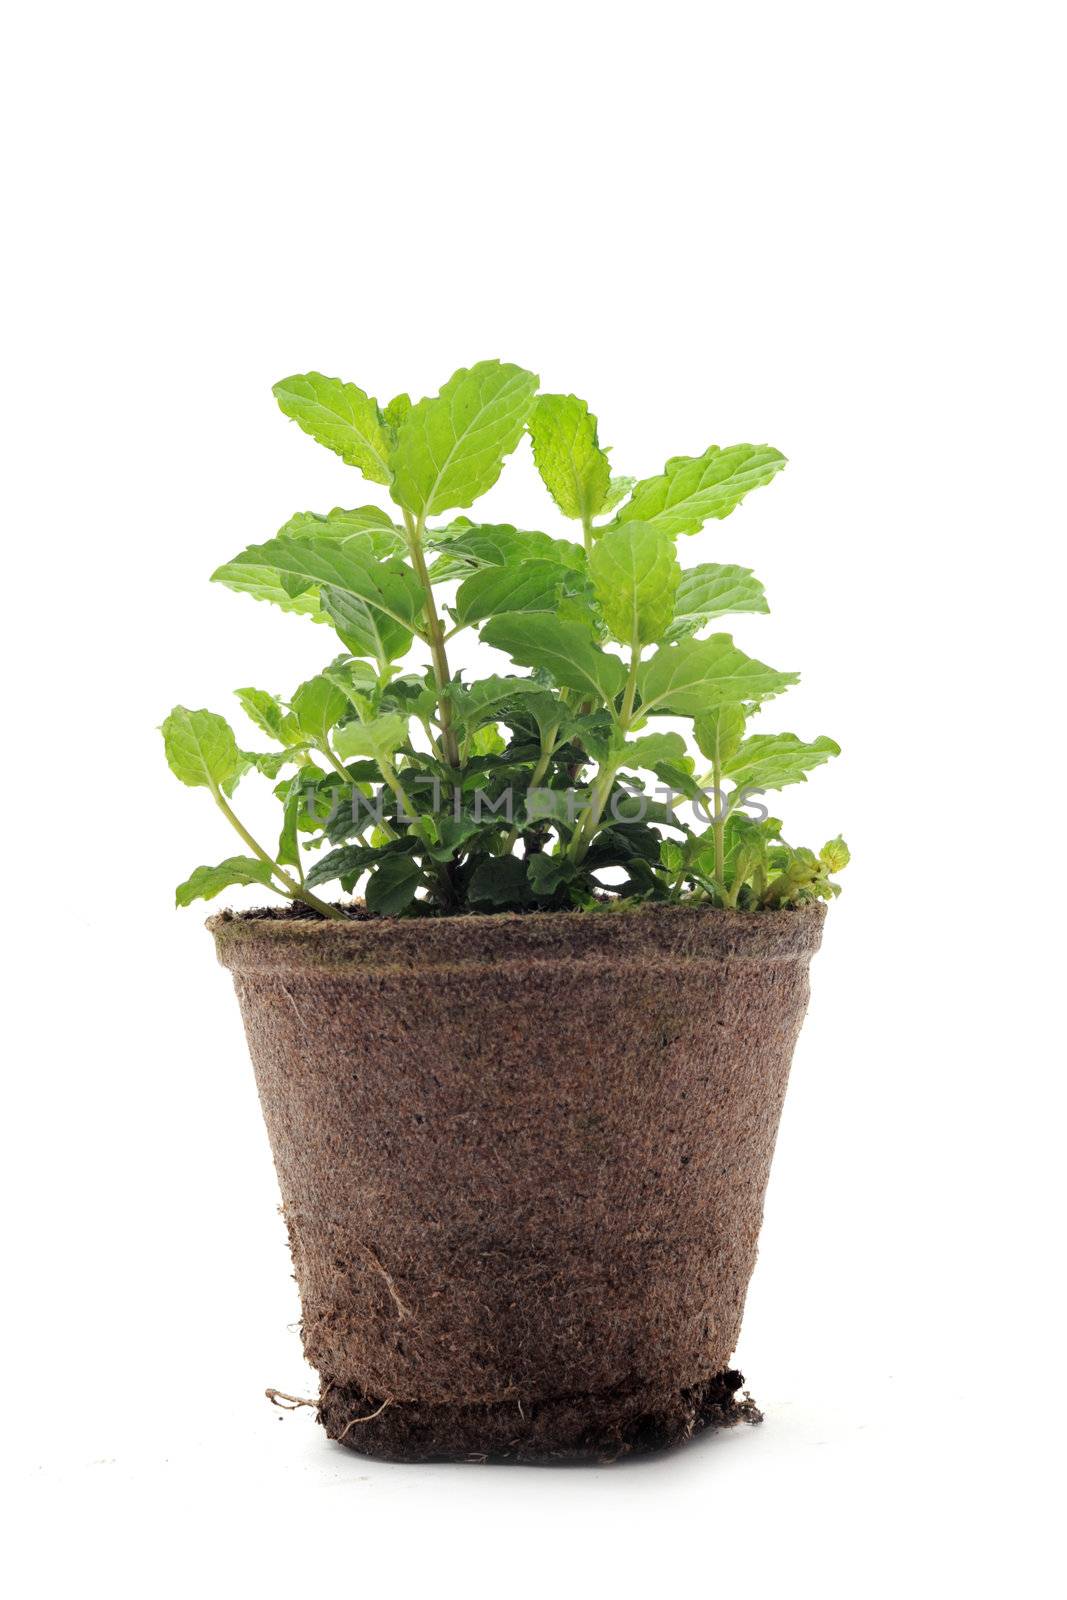 Fresh mint herb in a pot on the white background